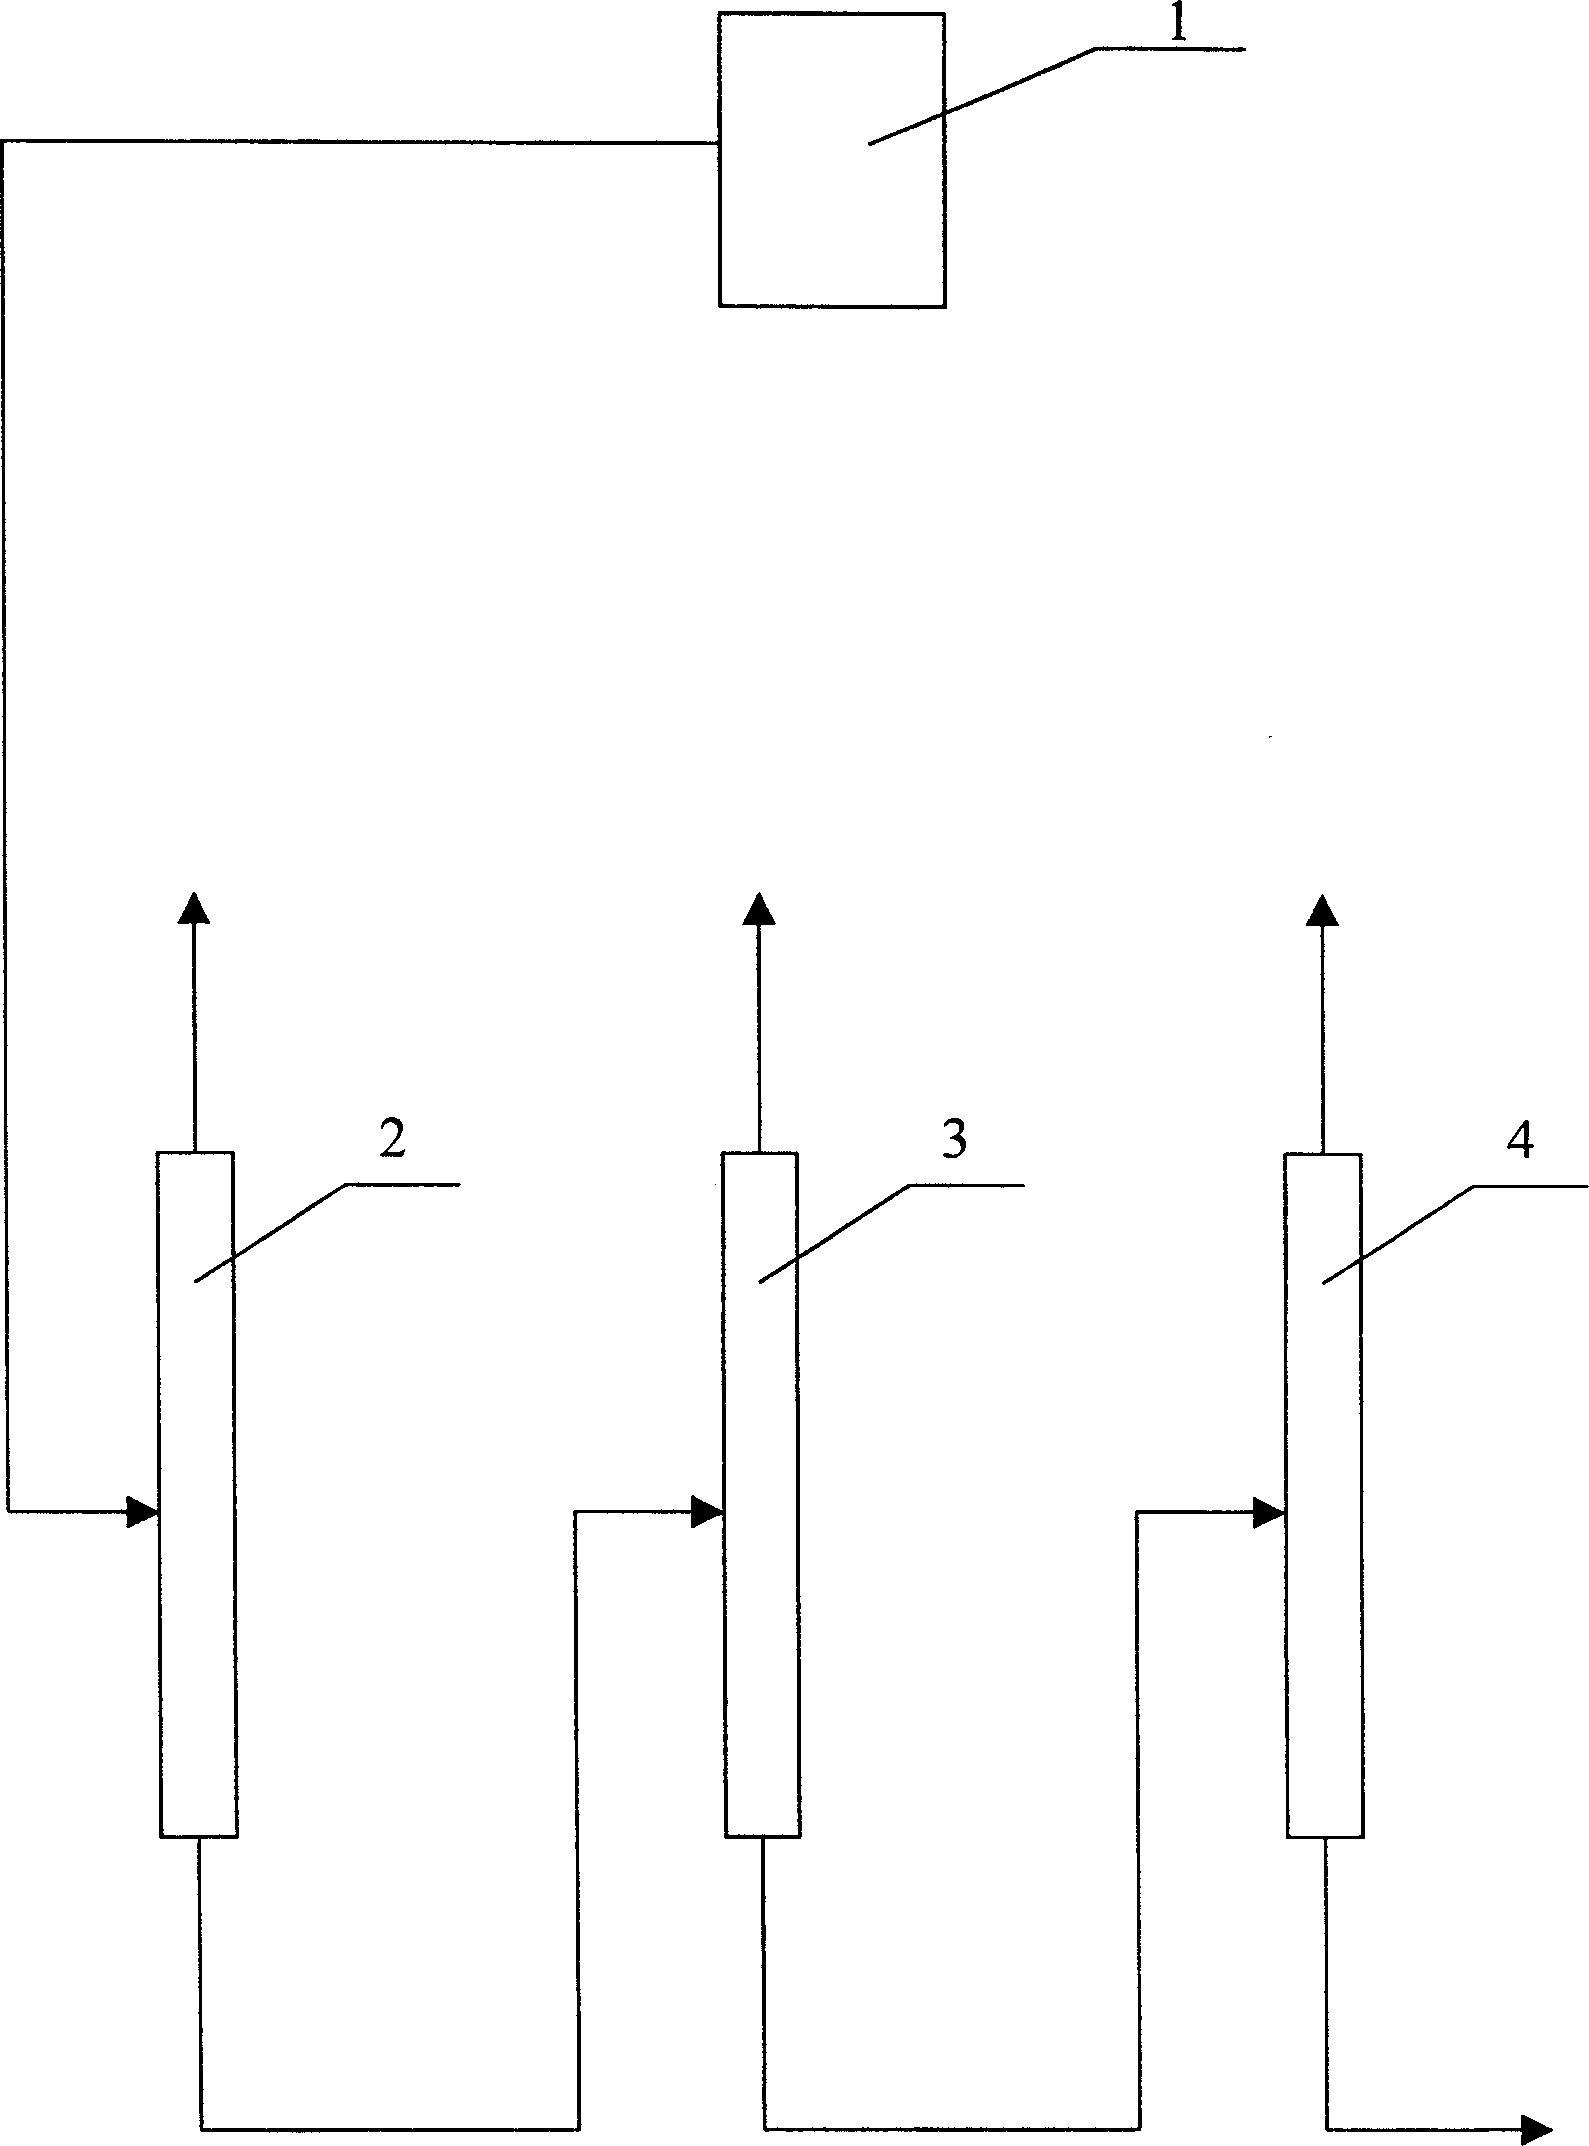 Process for extracting 1-methylnaphthalene and 2-methylnaphthalene from tar